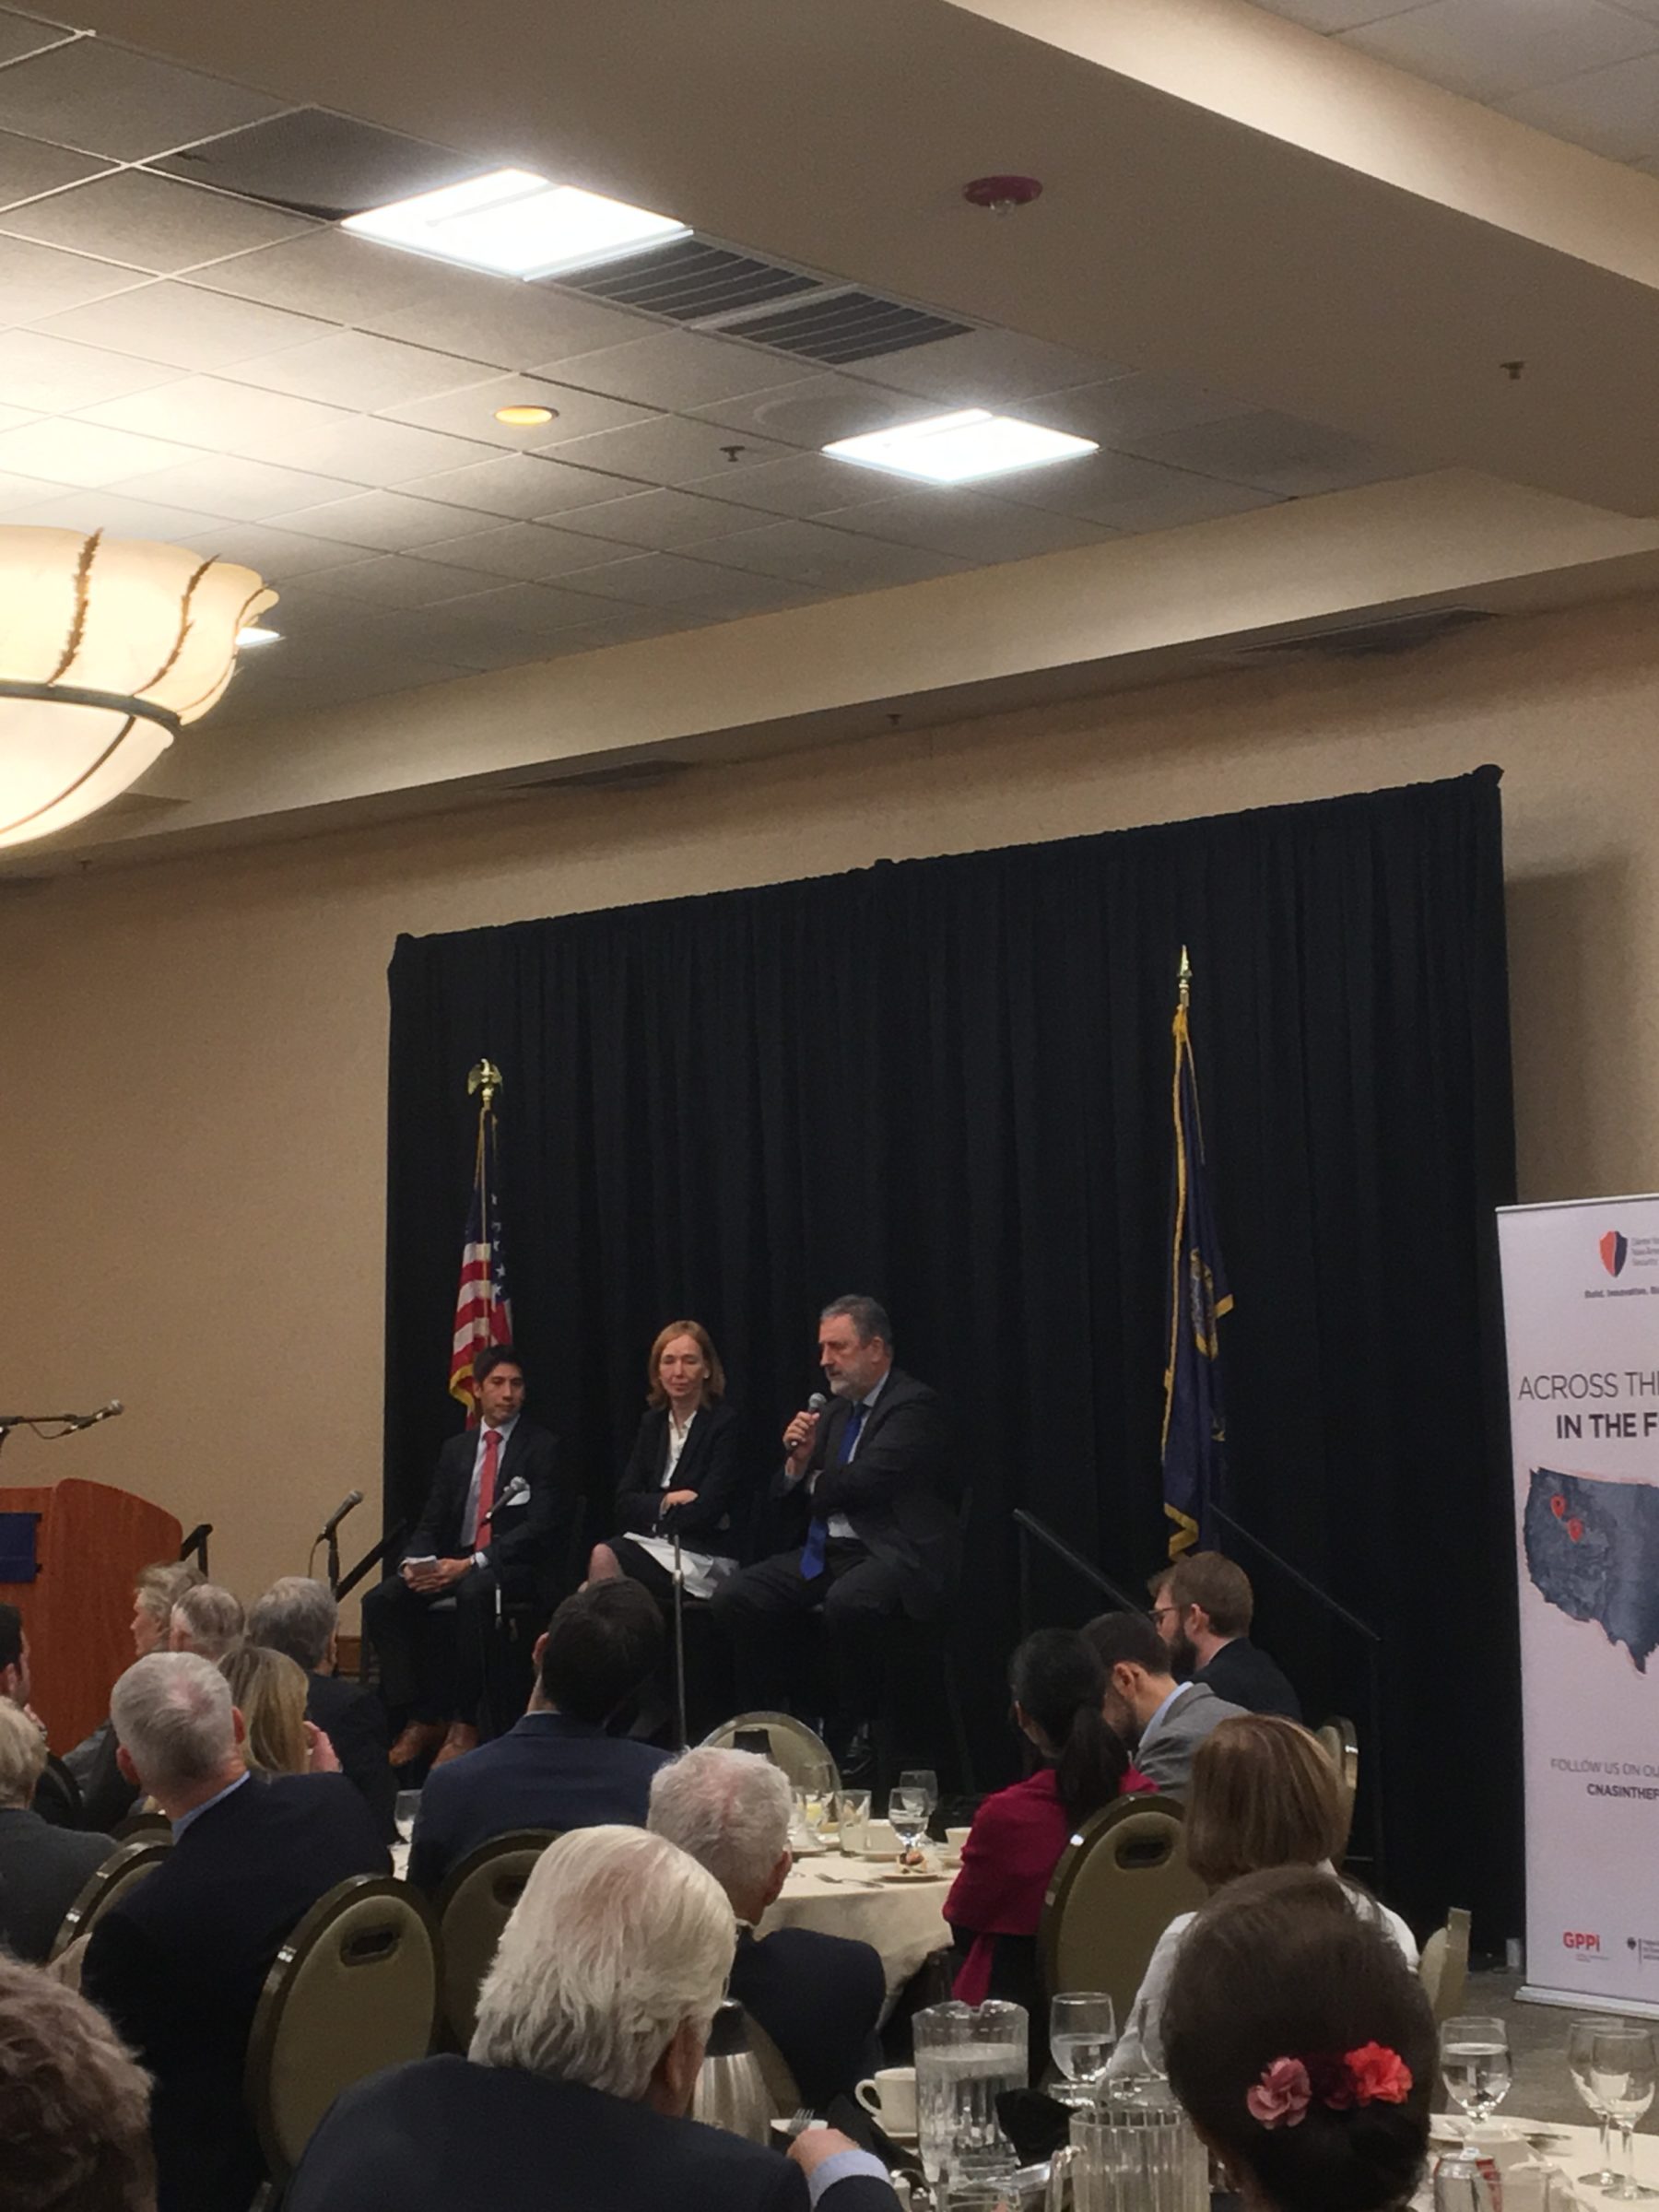 Amb. Schuwer participates in a panel discussion with Amb. Haber and Steve Feldstein at the Boise Committee on Foreign Relations.